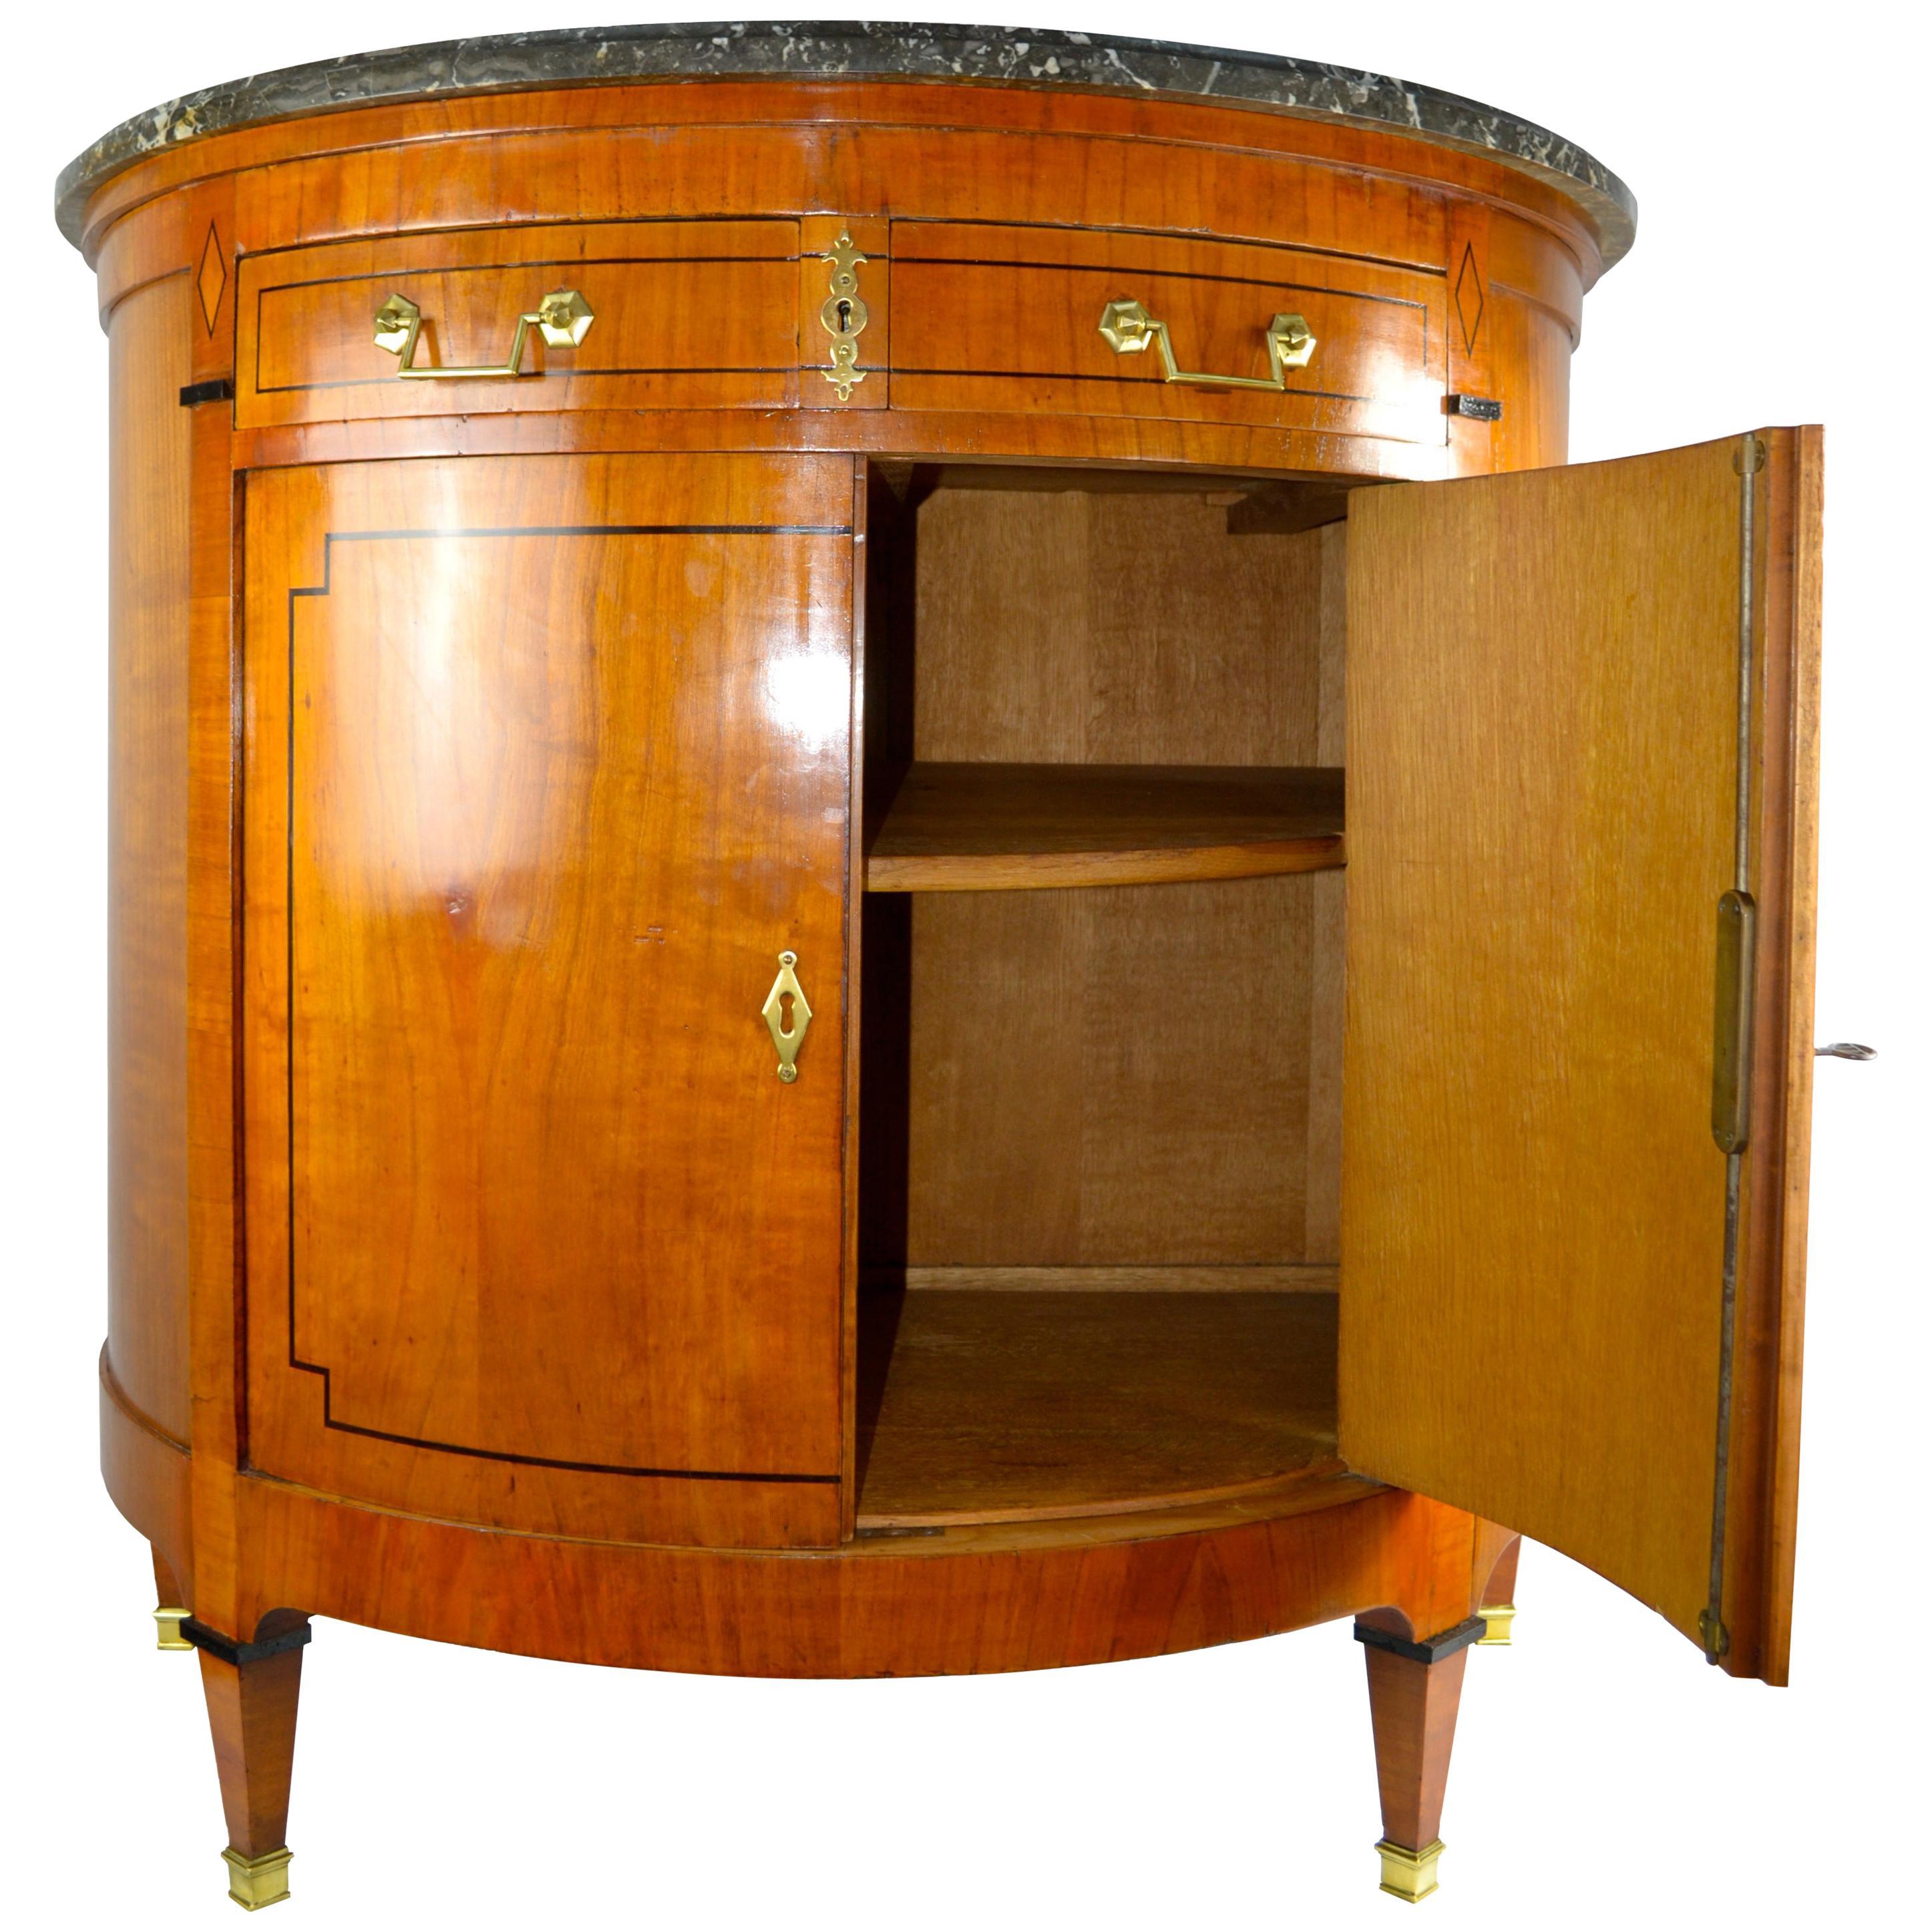 A simple classically inspired Directoire style demilune commode (1790-1805). The cabinet has a shaped grey mottled marble top over two top drawers and two main doors. The fruitwood carcass is inlaid with ebony banding. Were common.